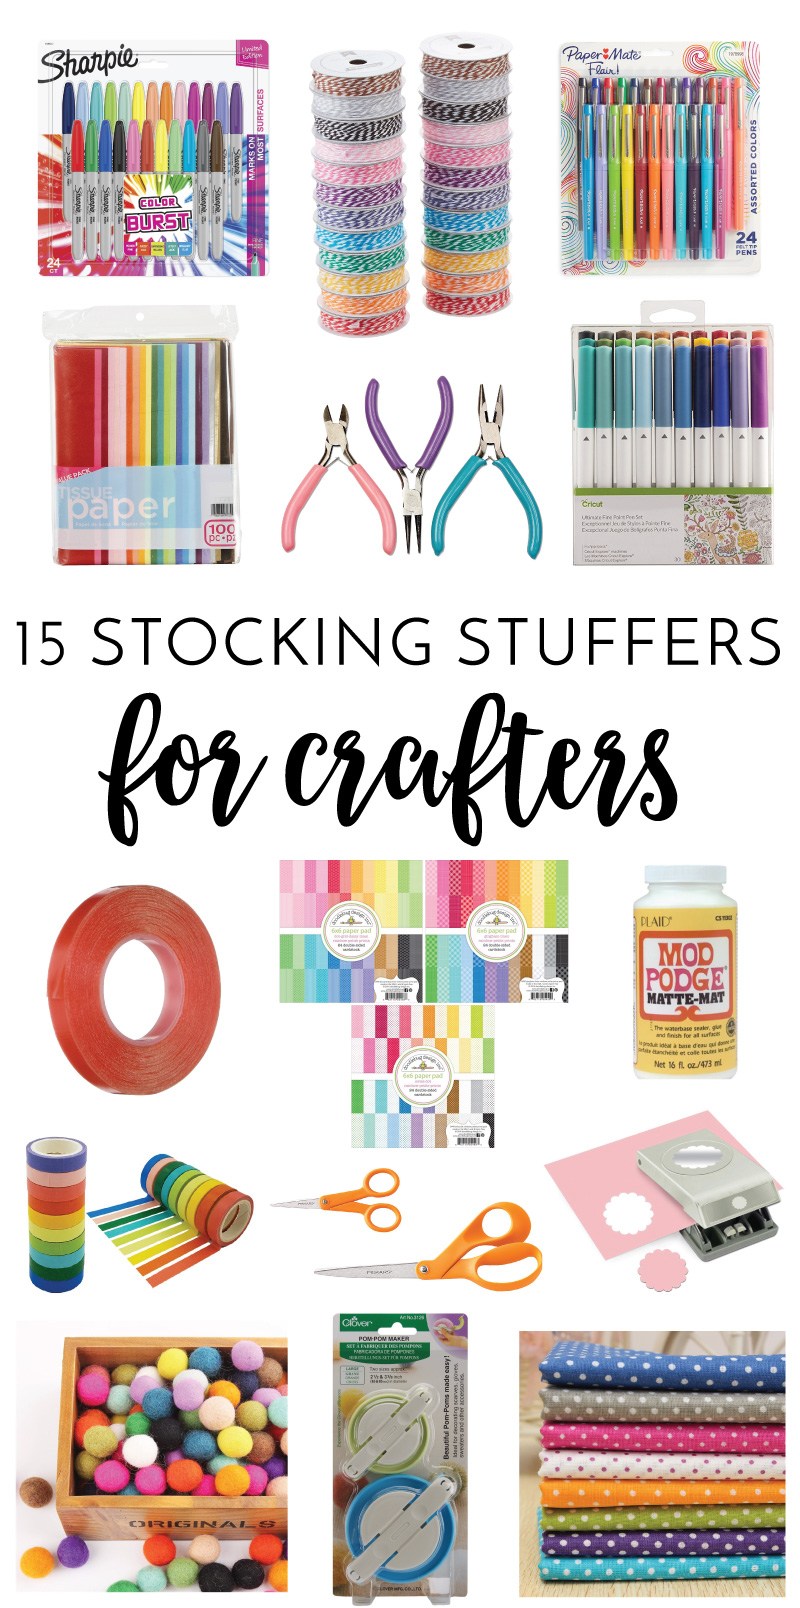 15 Stocking Stuffers for Crafters on Love the Day